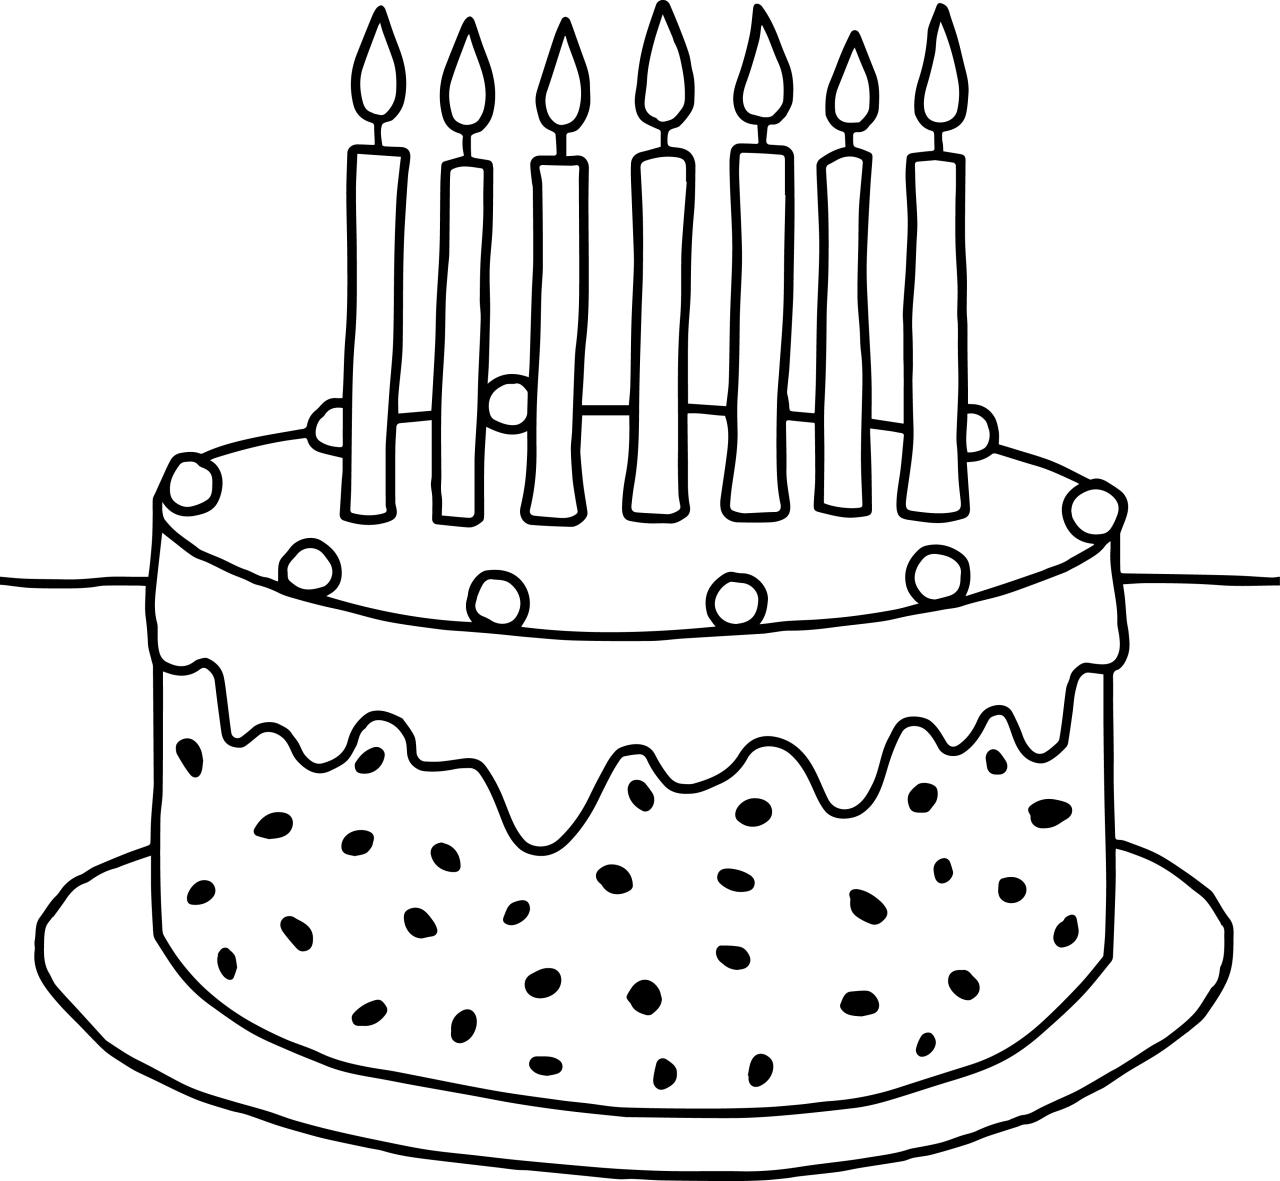 Cute Cake Coloring Pages at Free printable colorings